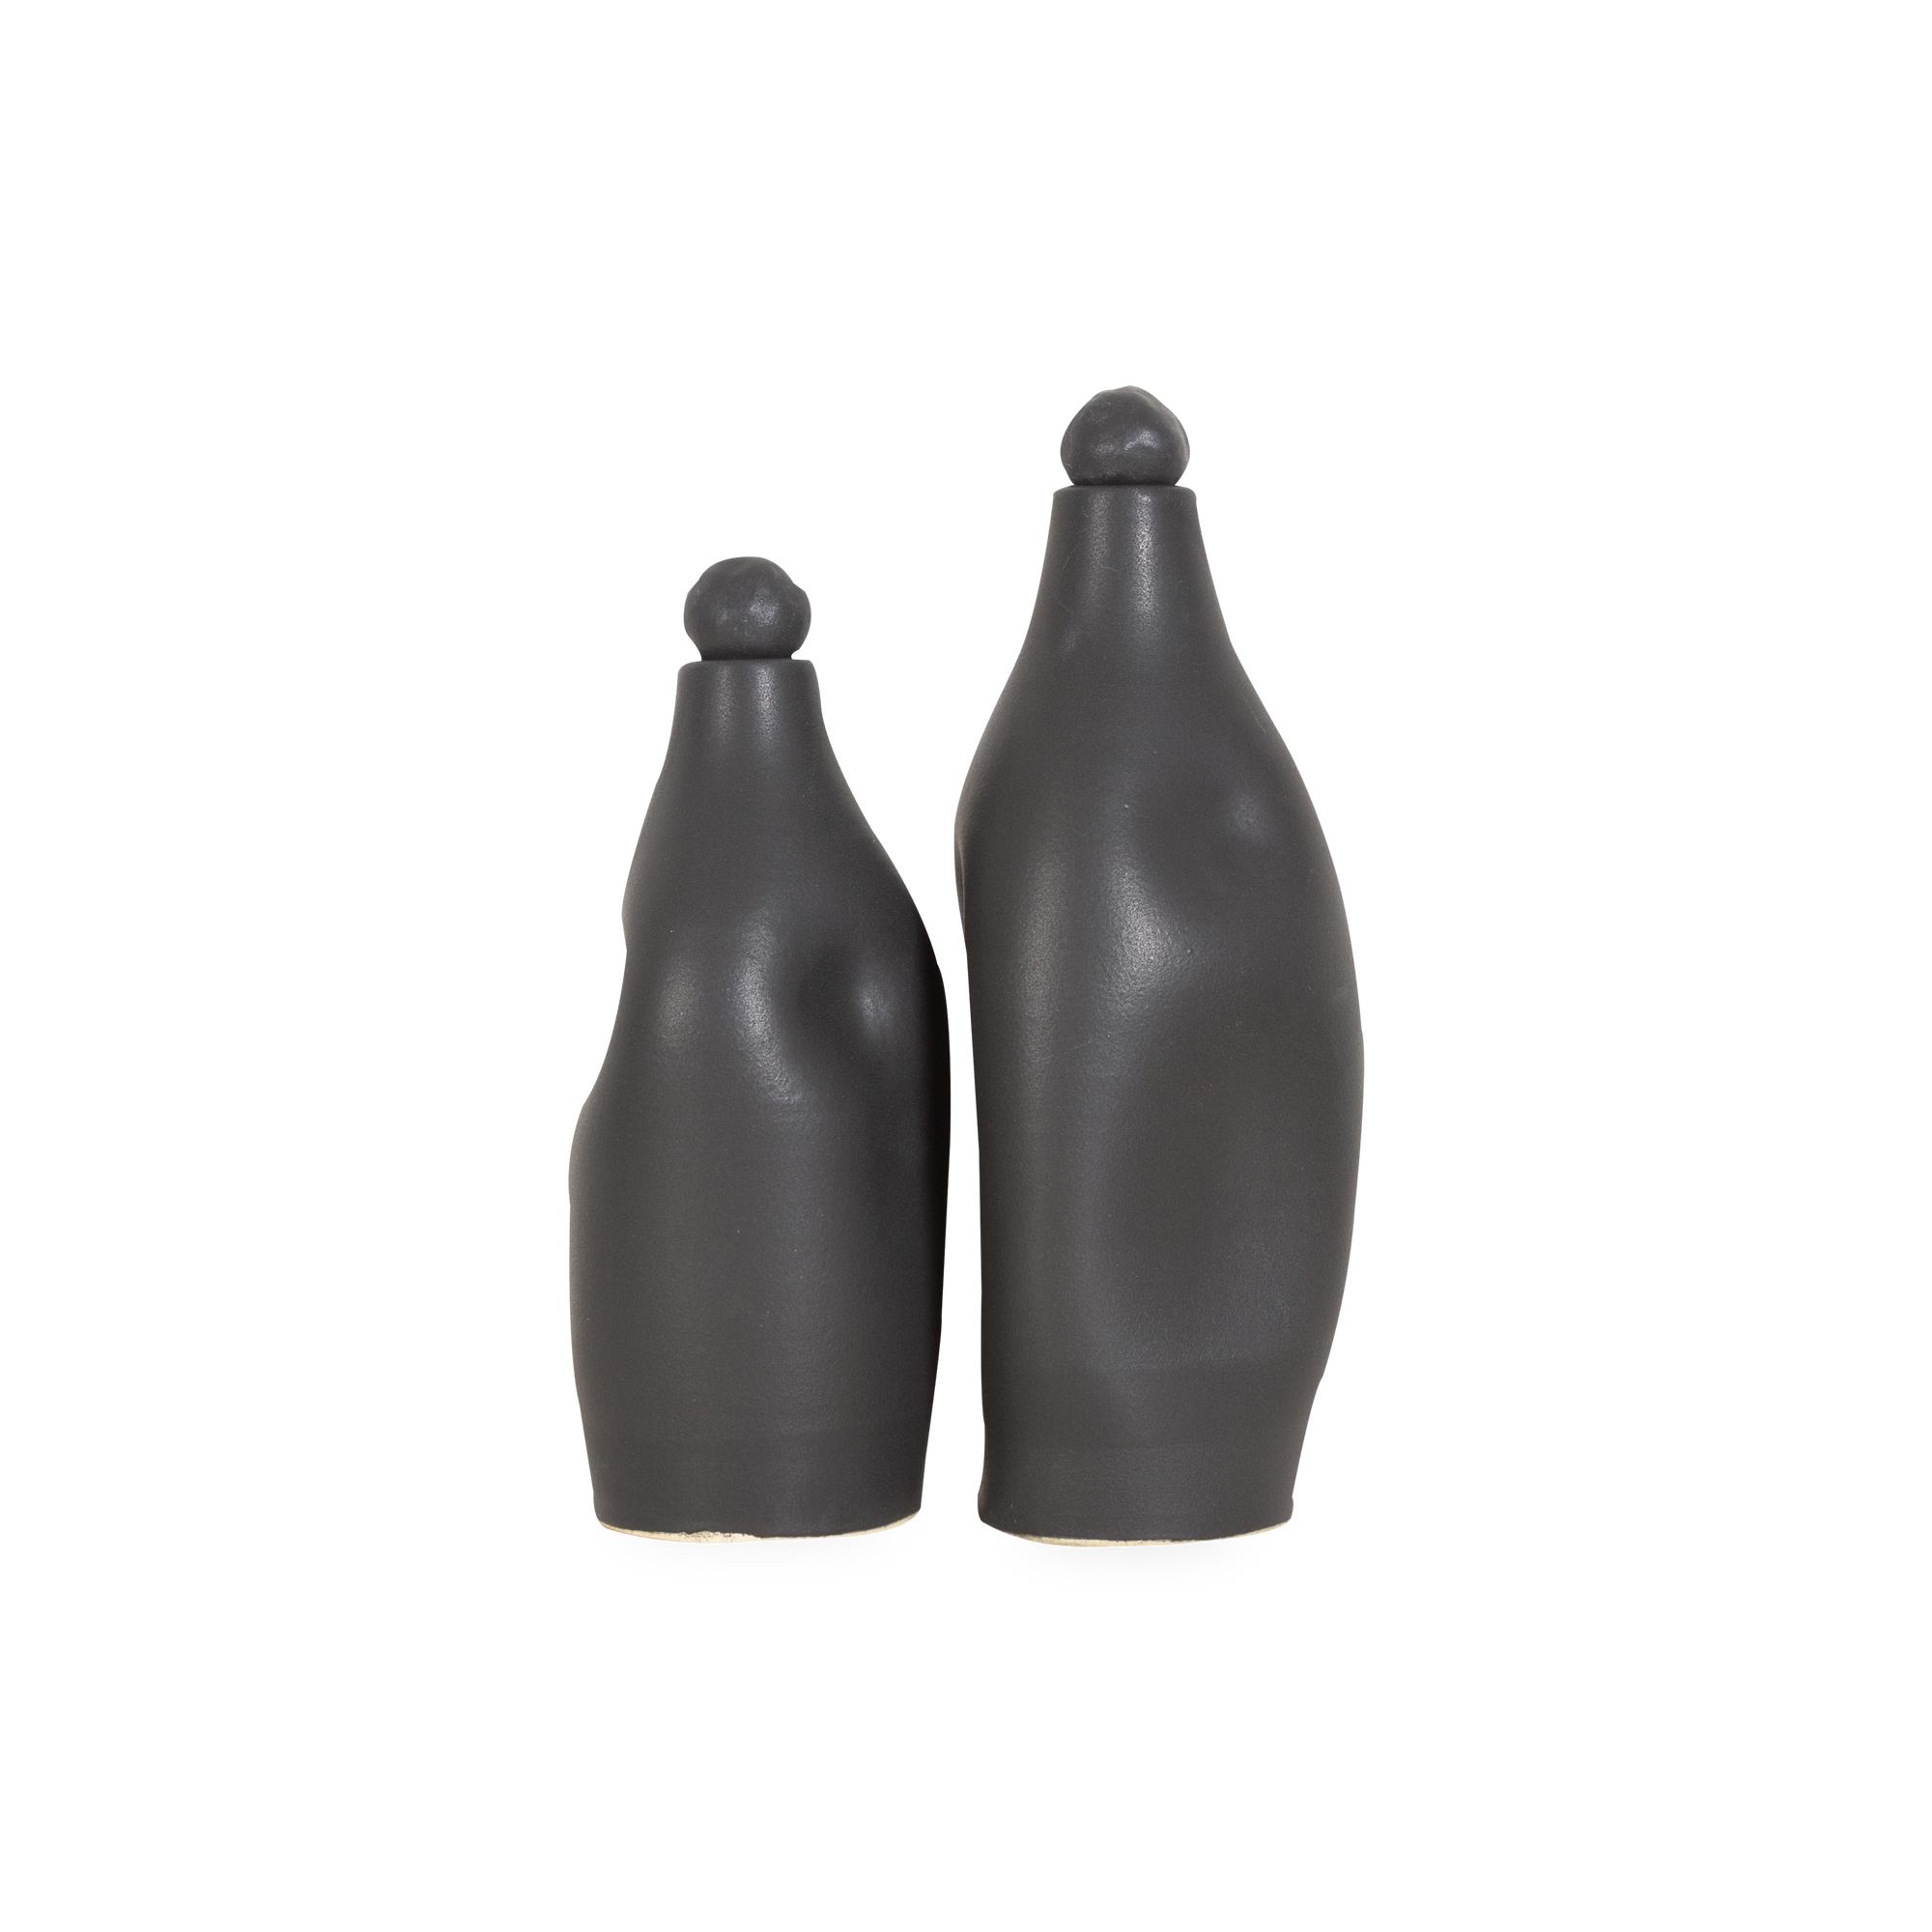 Crafted with the intention of companionship, the Florence Bottles are designed with grooves on the body that along the bottles to fit together side-by-side with each other.